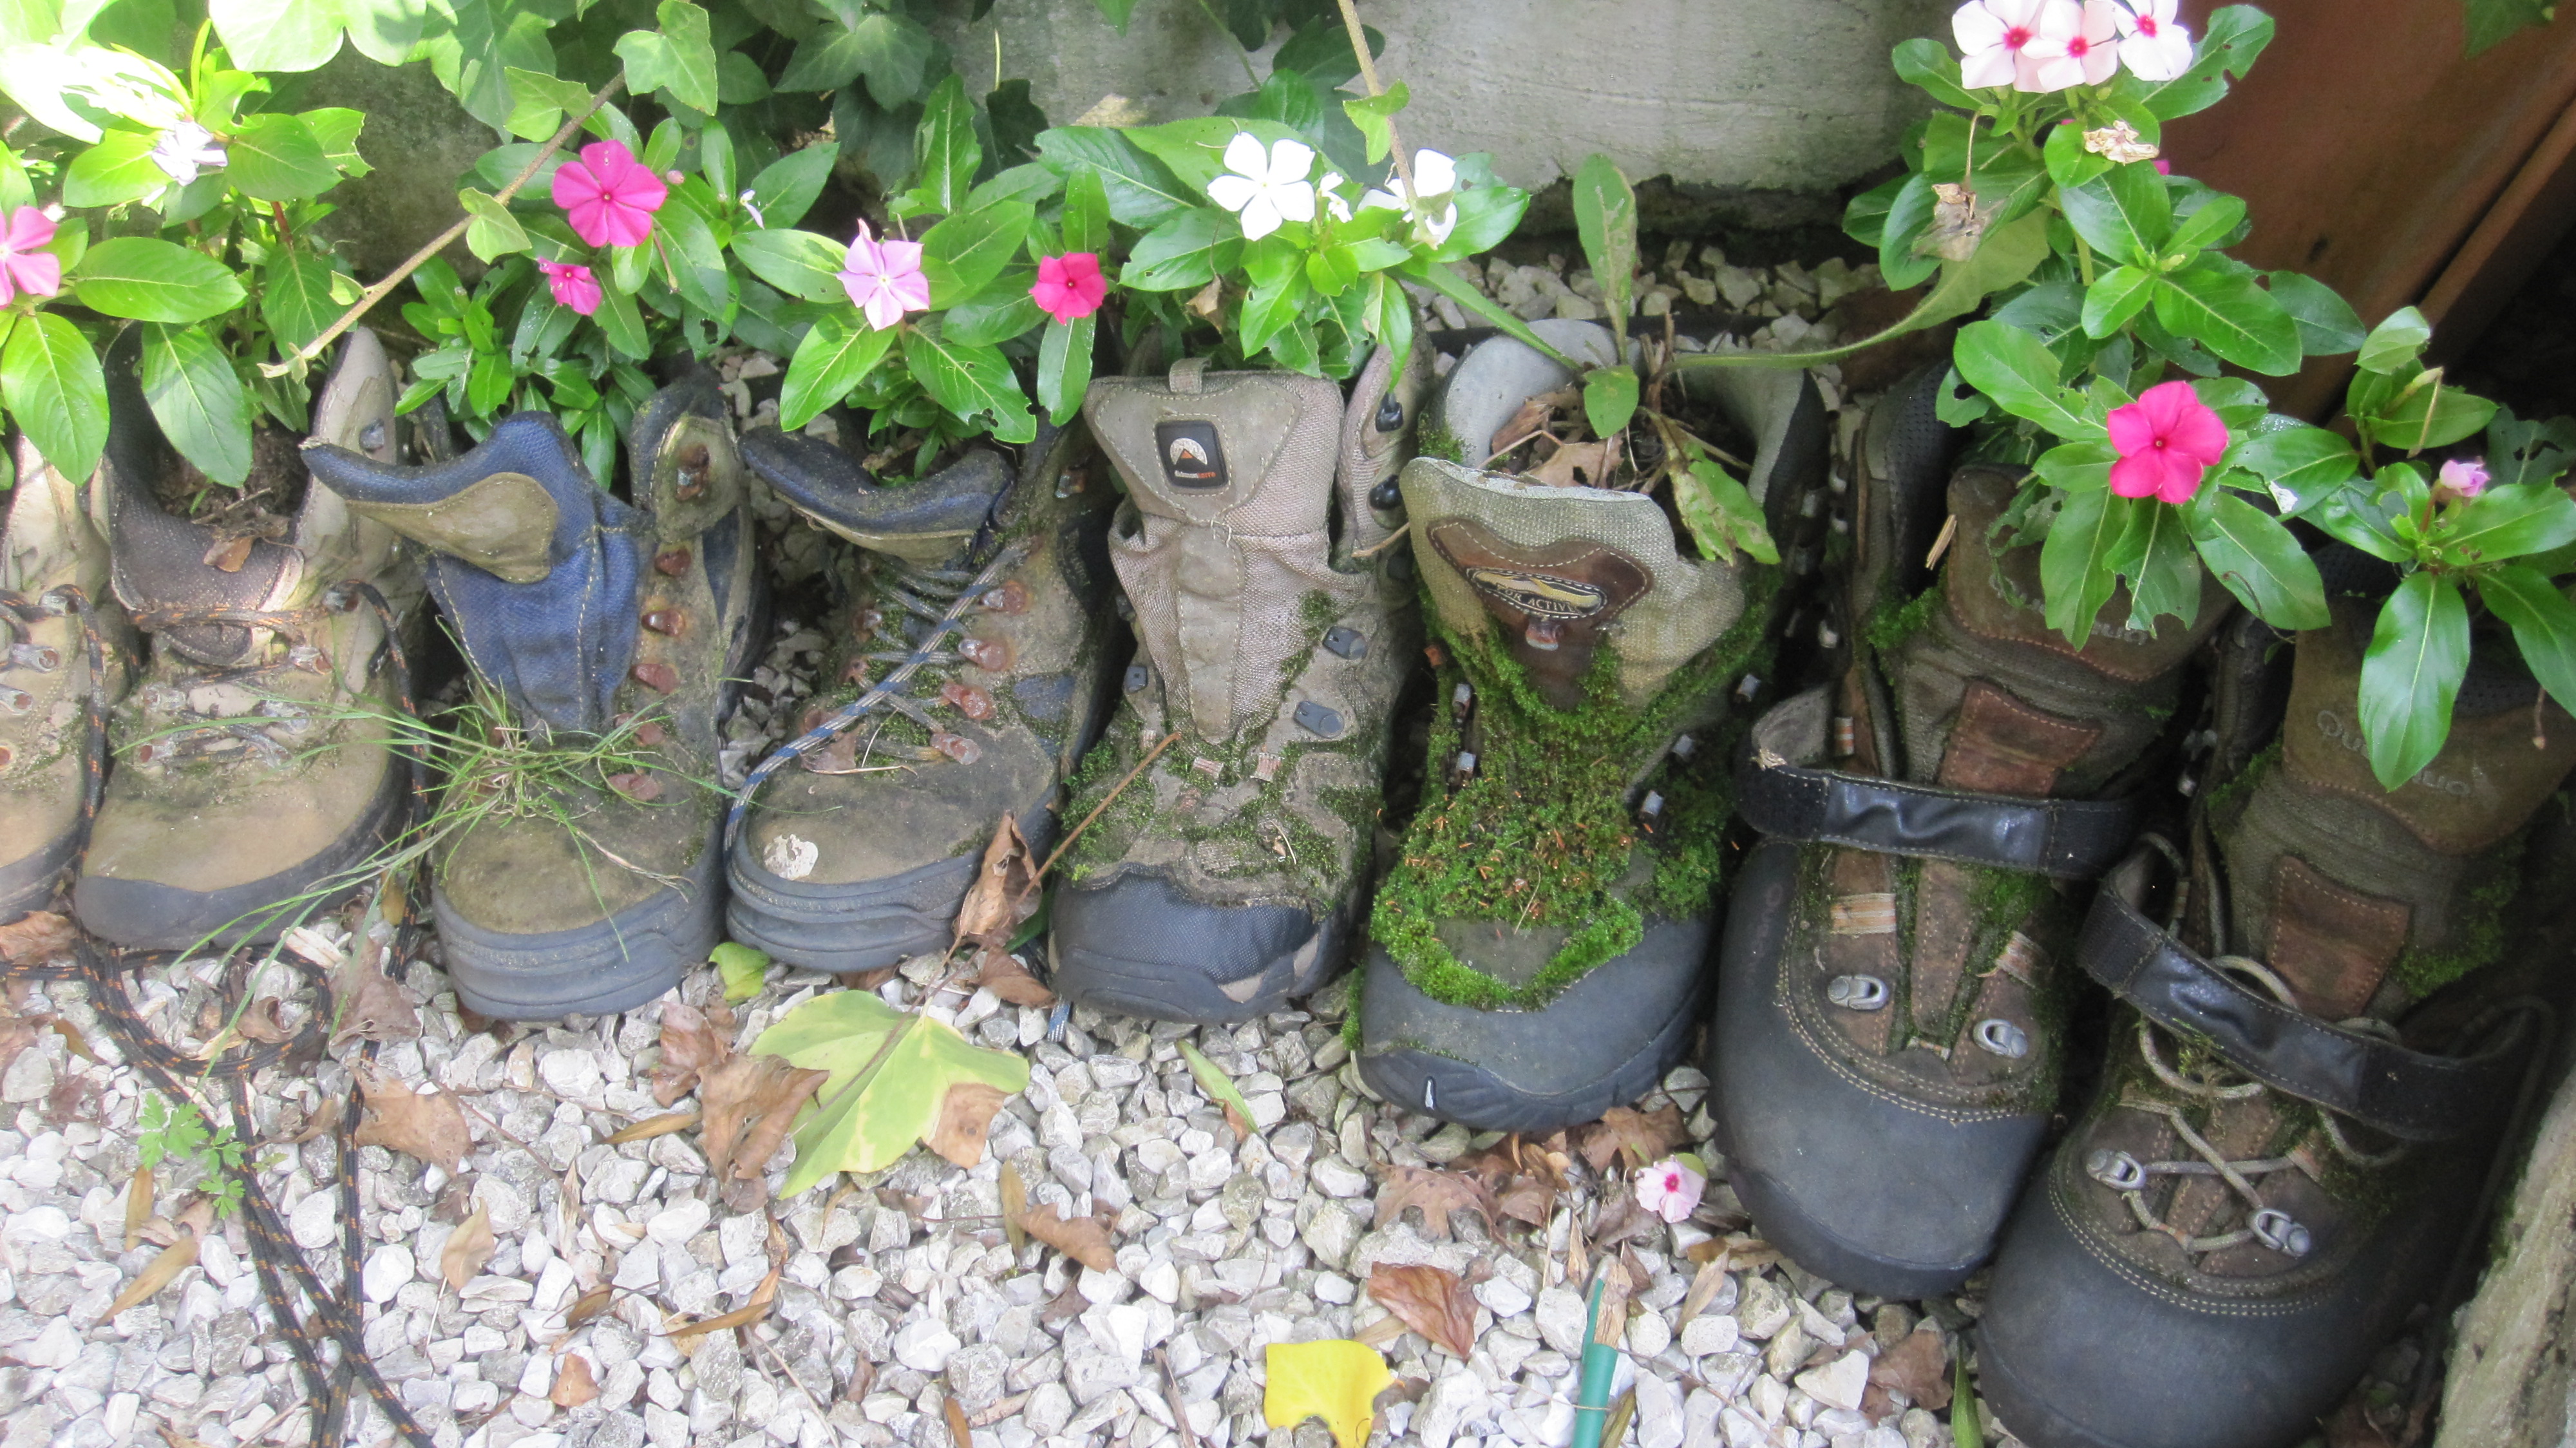 Shoes left in the refuge used as flowerpots